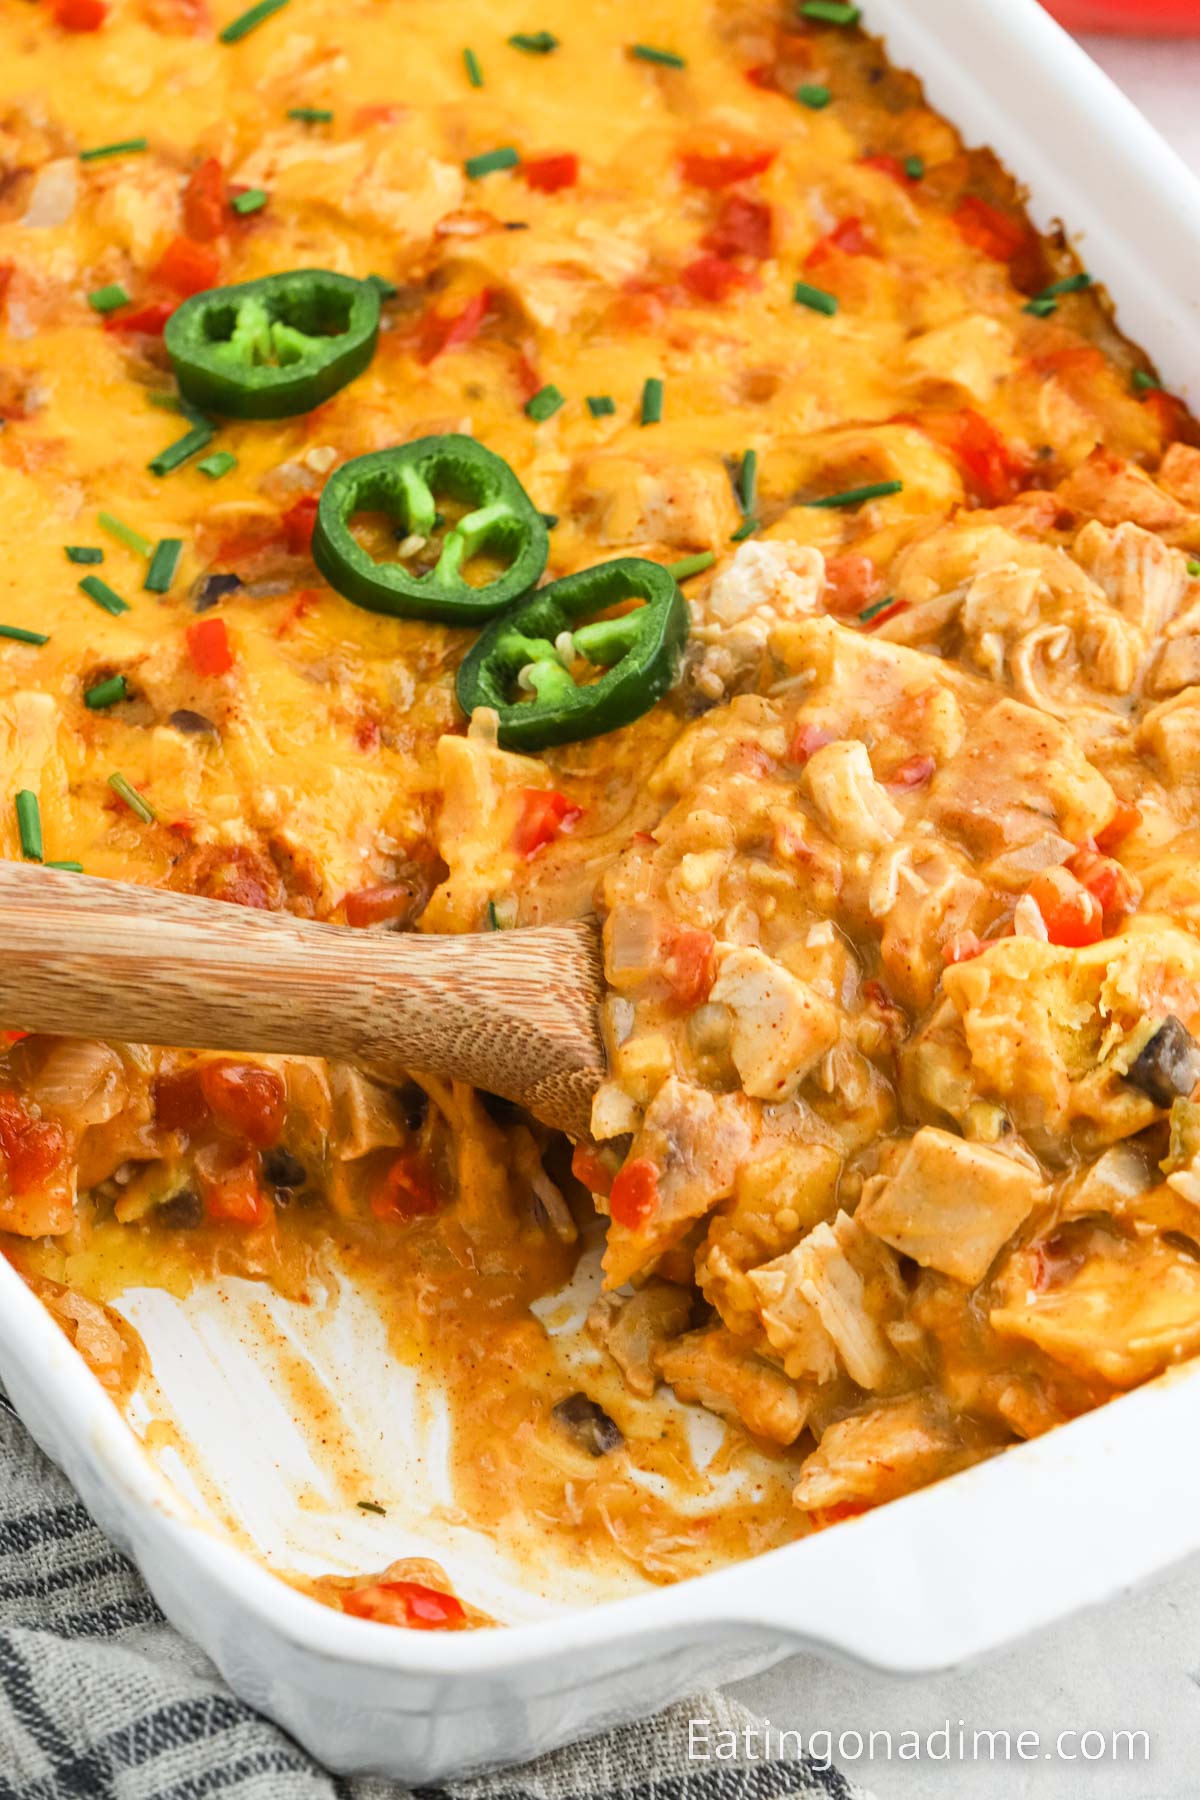 King Ranch Chicken Casserole in a baking dish with a wooden spoon